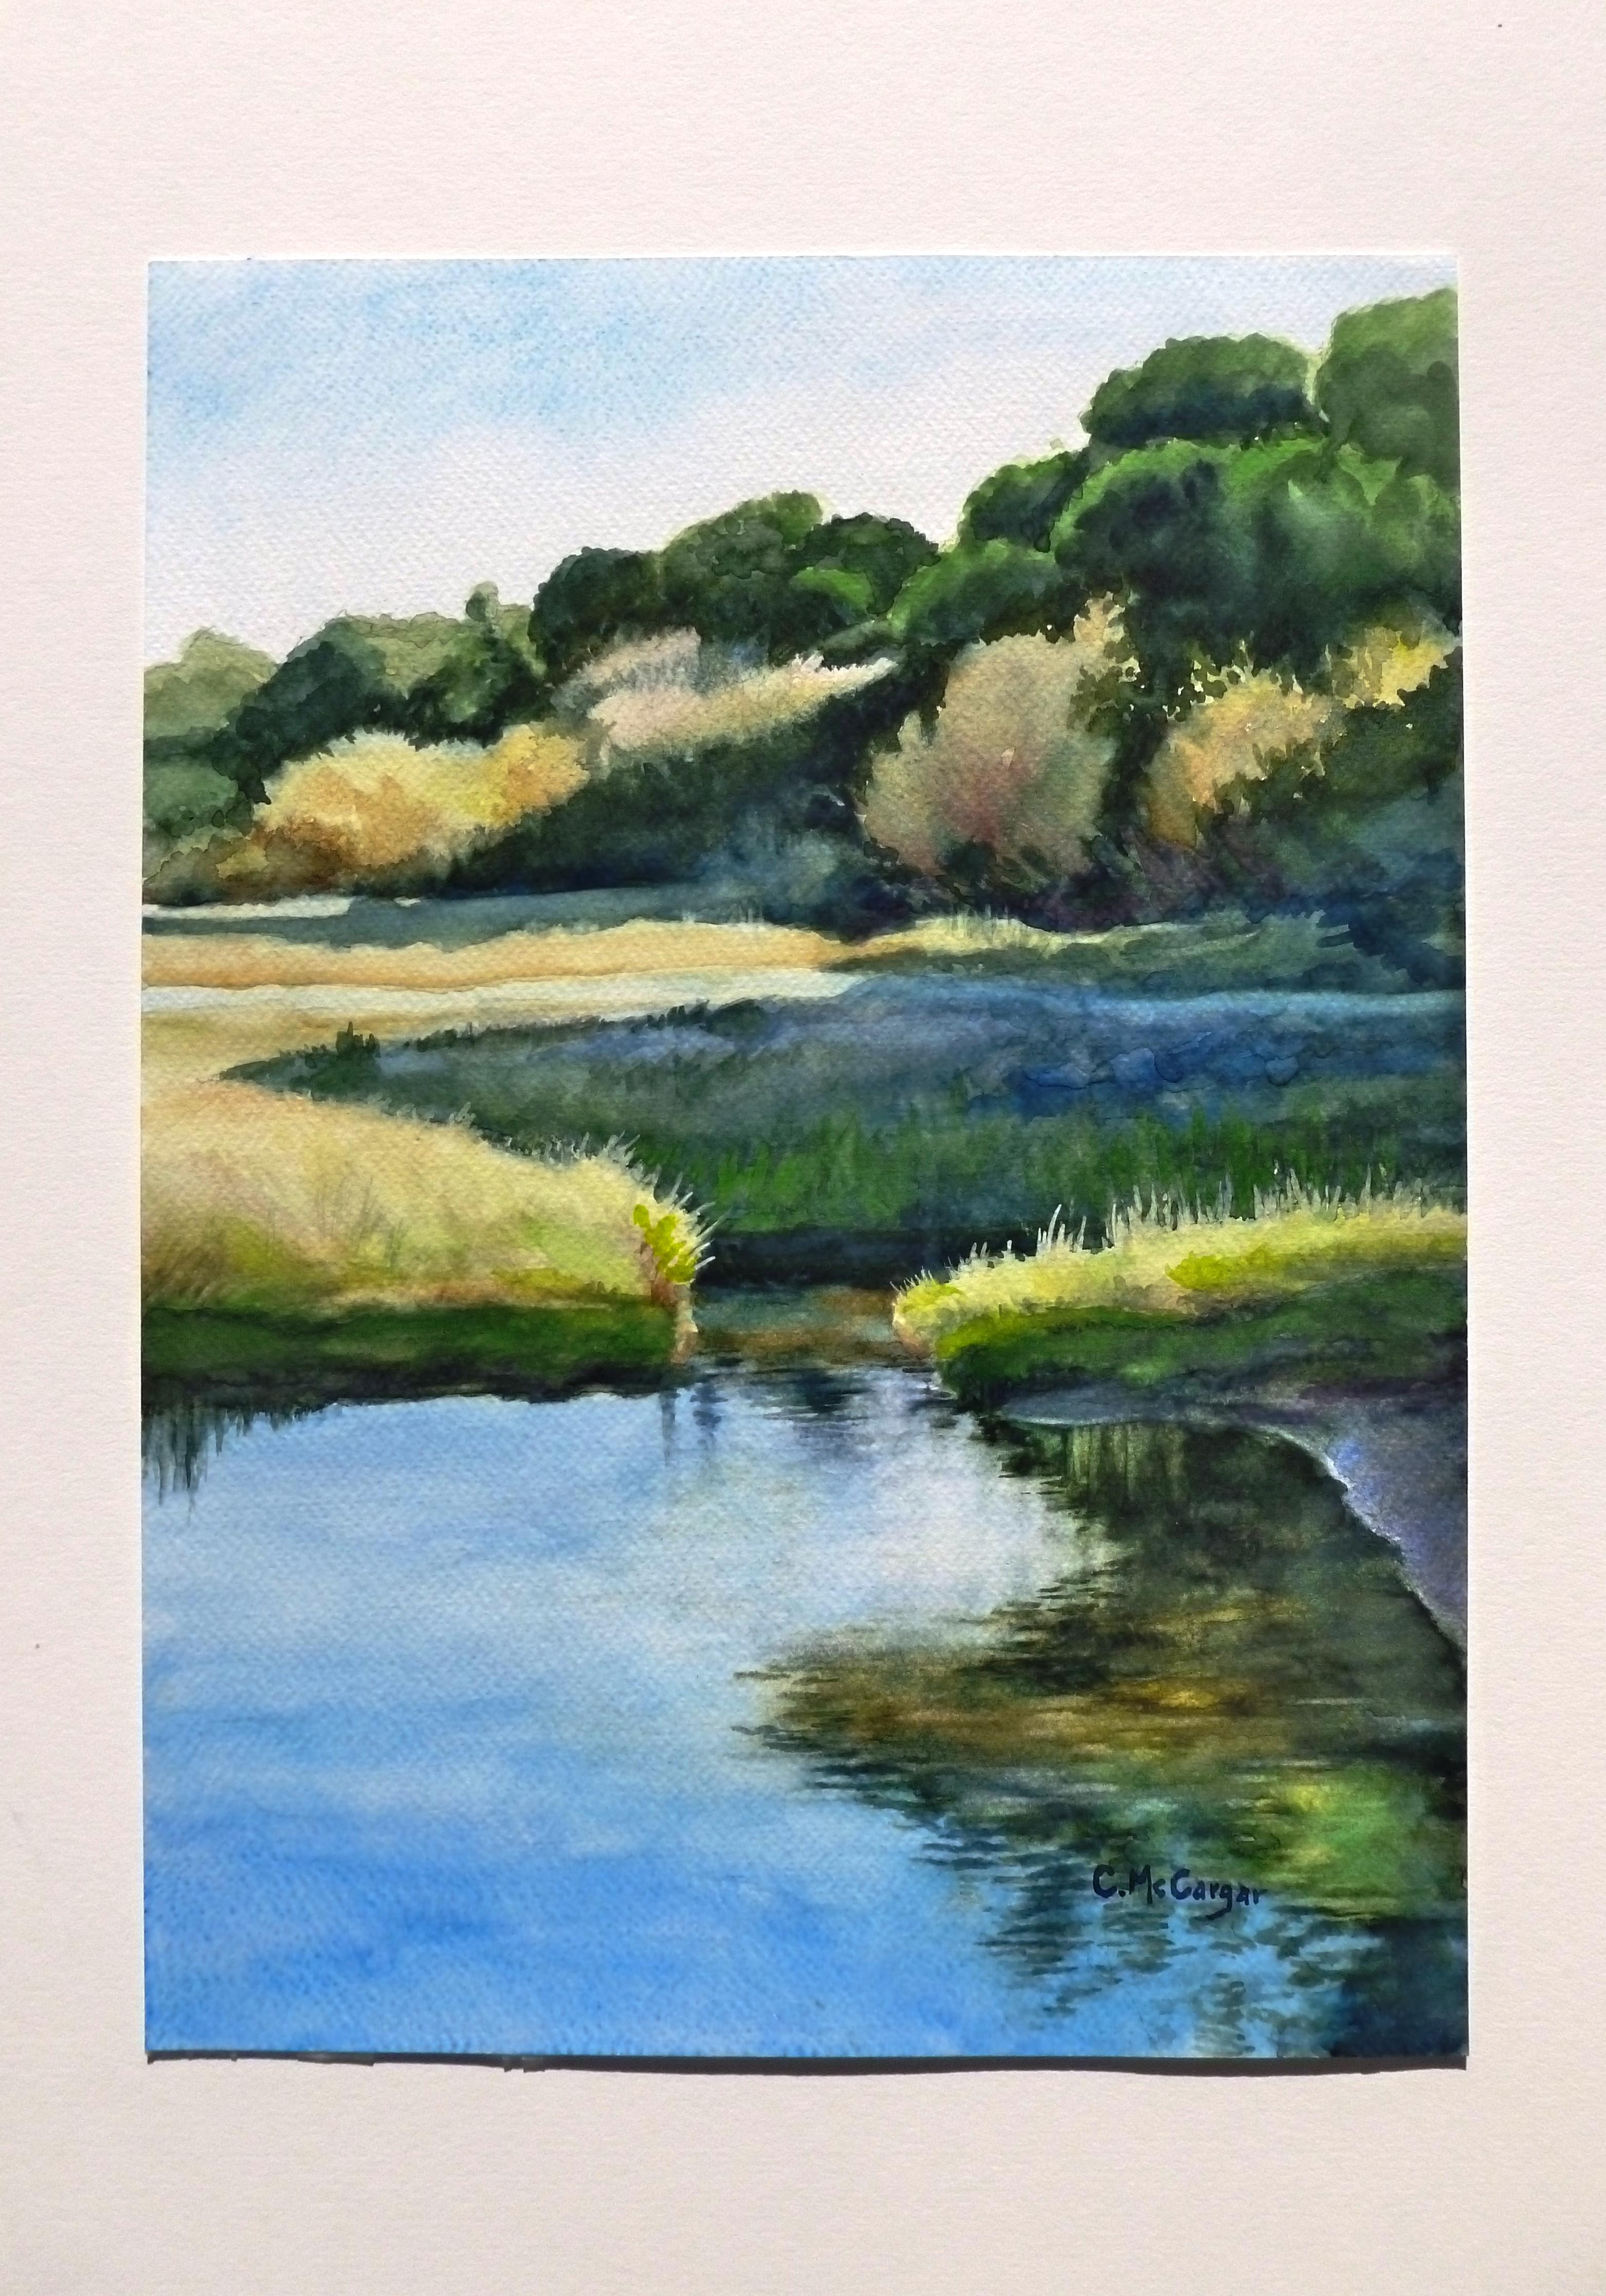 <p>Artist Comments<br>Artist Catherine McCargar explores the tranquility of still waters and deep shadows in this peaceful coastal landscape. The sun's rays shine on the greenery with the clear sky pristinely reflected on the water. Skilfully